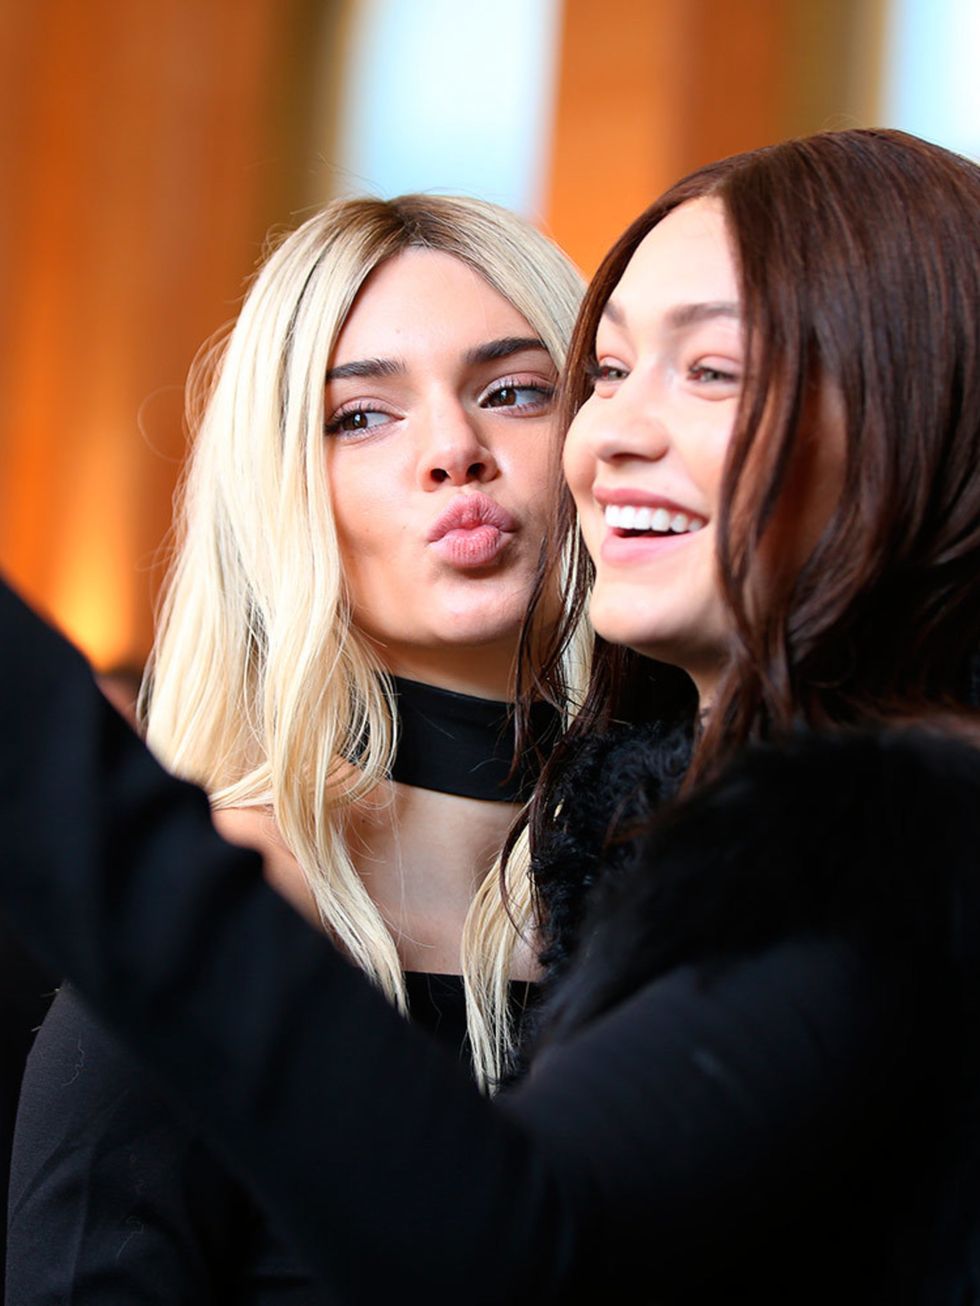 Gigi Hadid and Kendall Jenner backstage at the Balmain a/w 2016 show during Paris Fashion Week, March 2016.